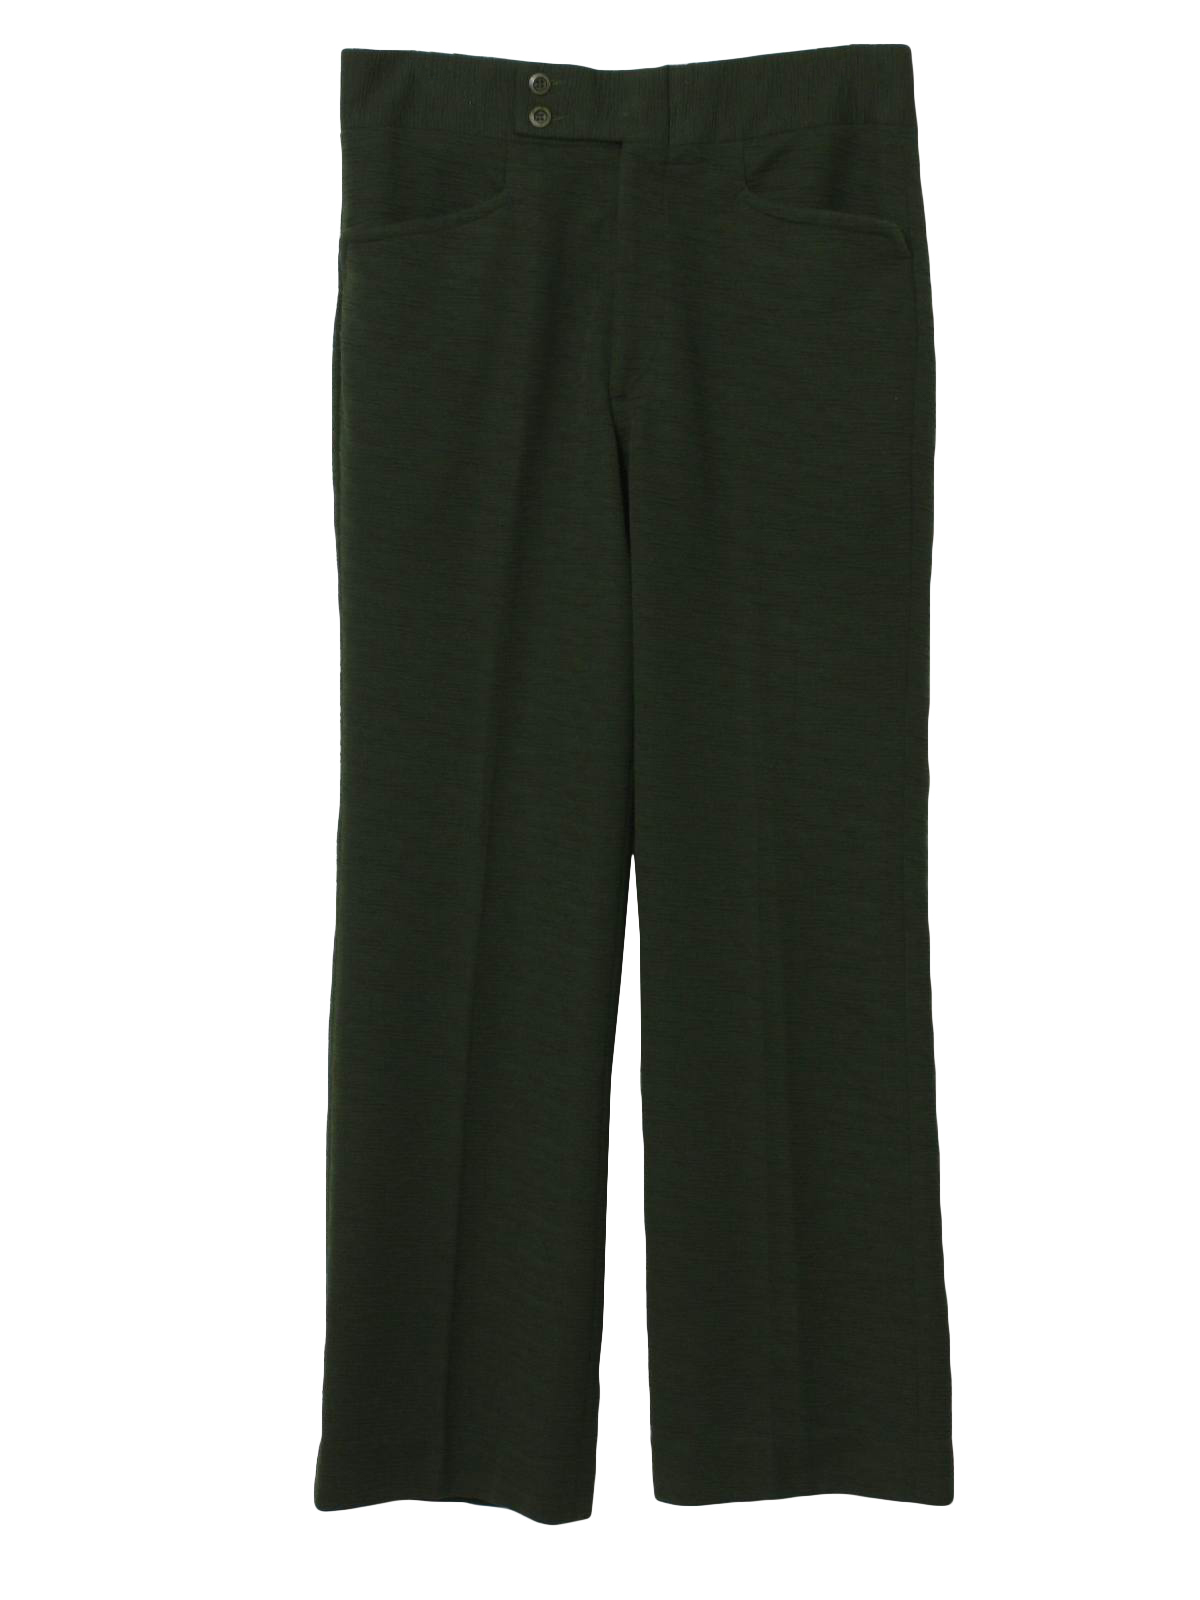 Seventies Flex a waist by Asher Flared Pants / Flares: 70s -Flex a ...